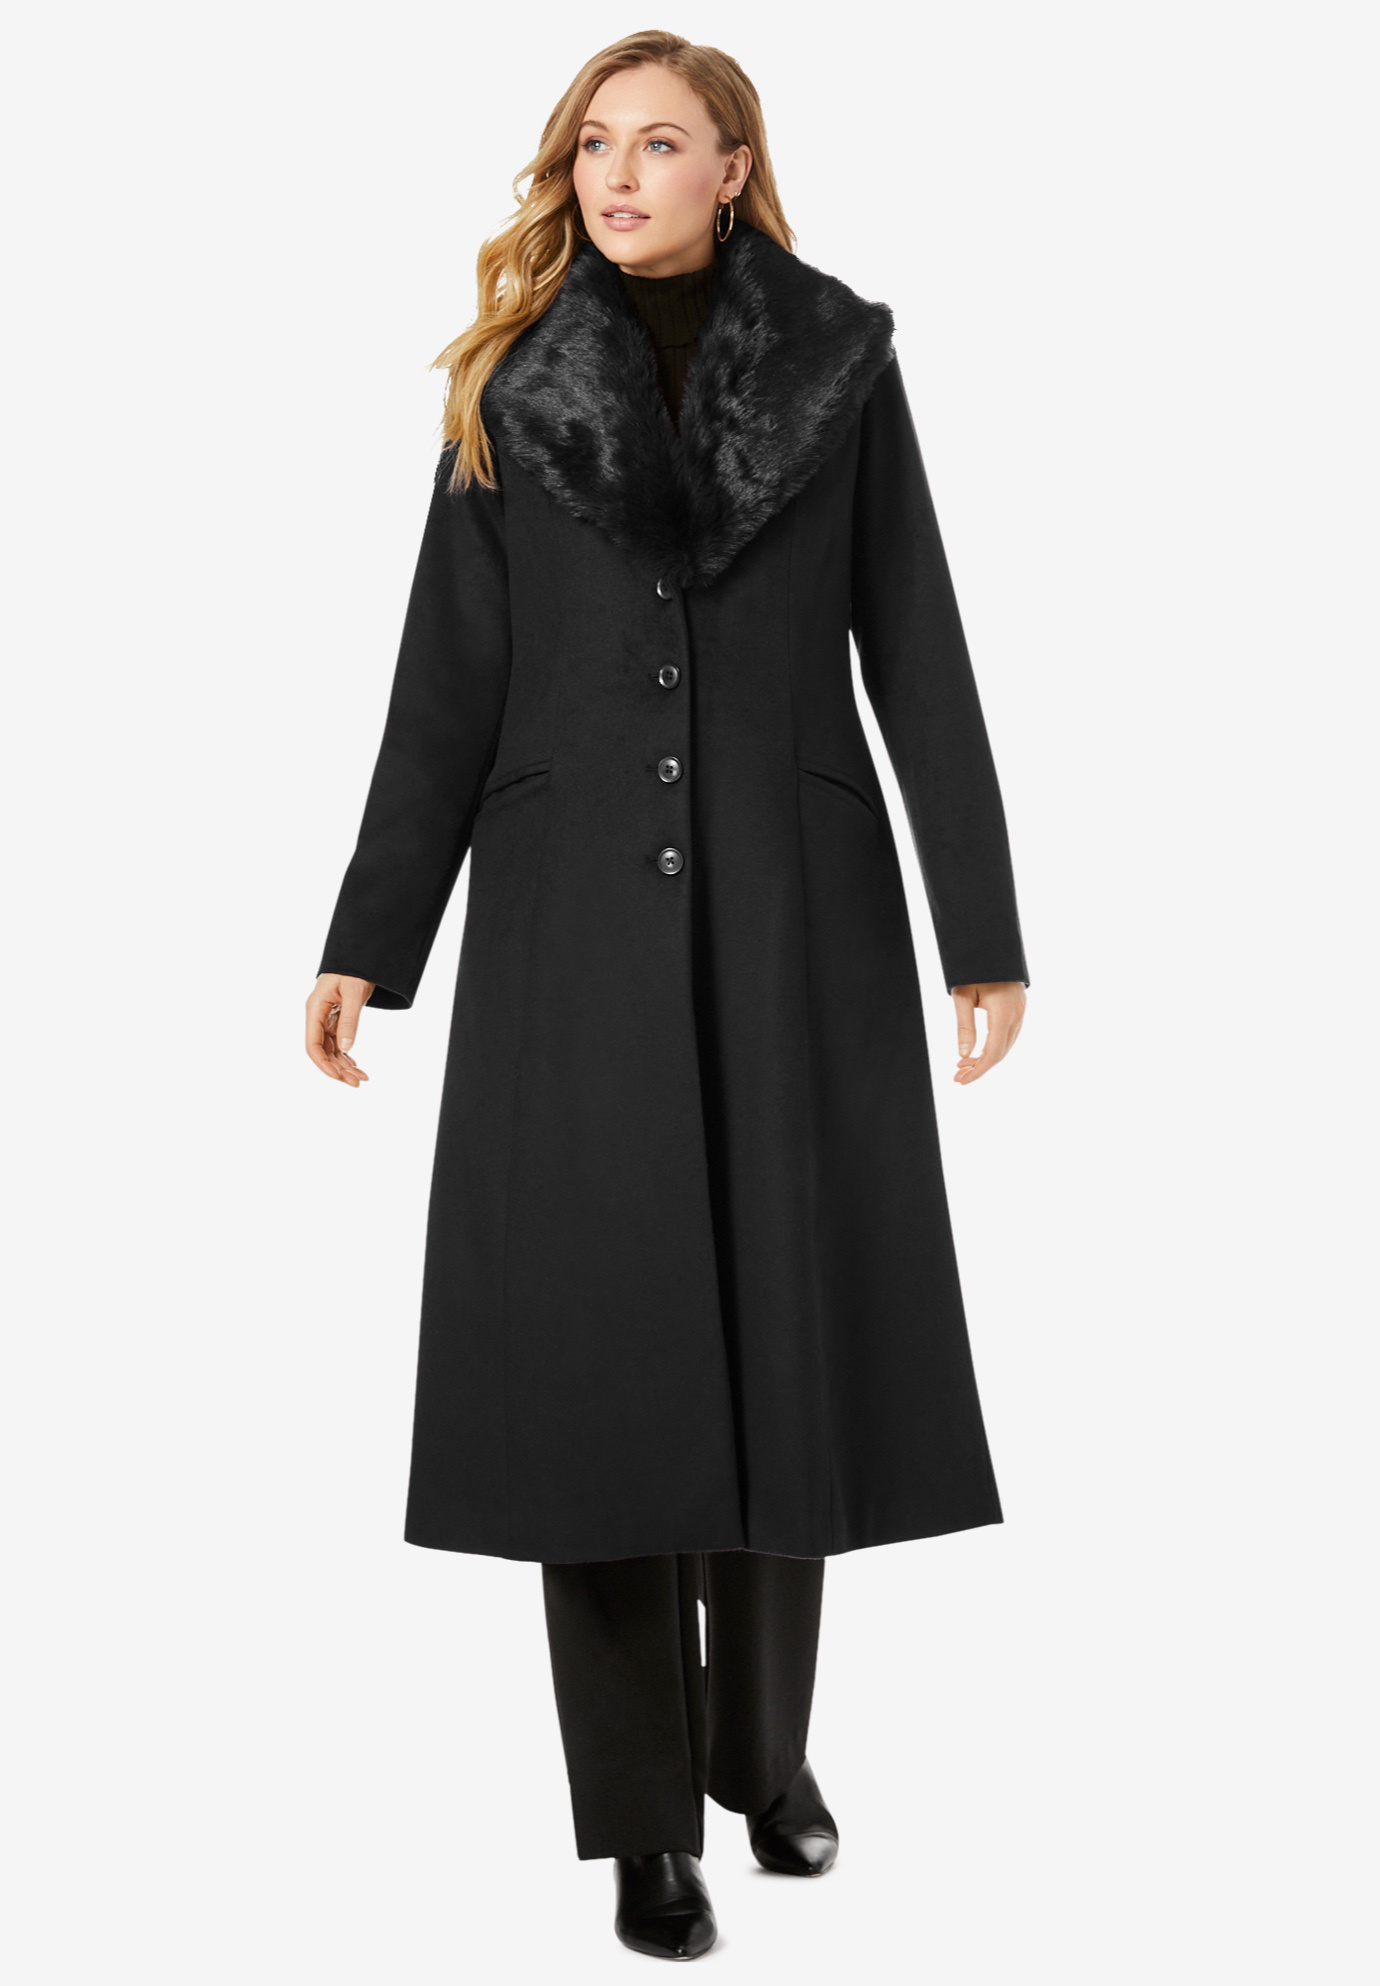 Long Wool-Blend Coat with Faux Fur Collar | Plus Size Wool Coats | Full ...